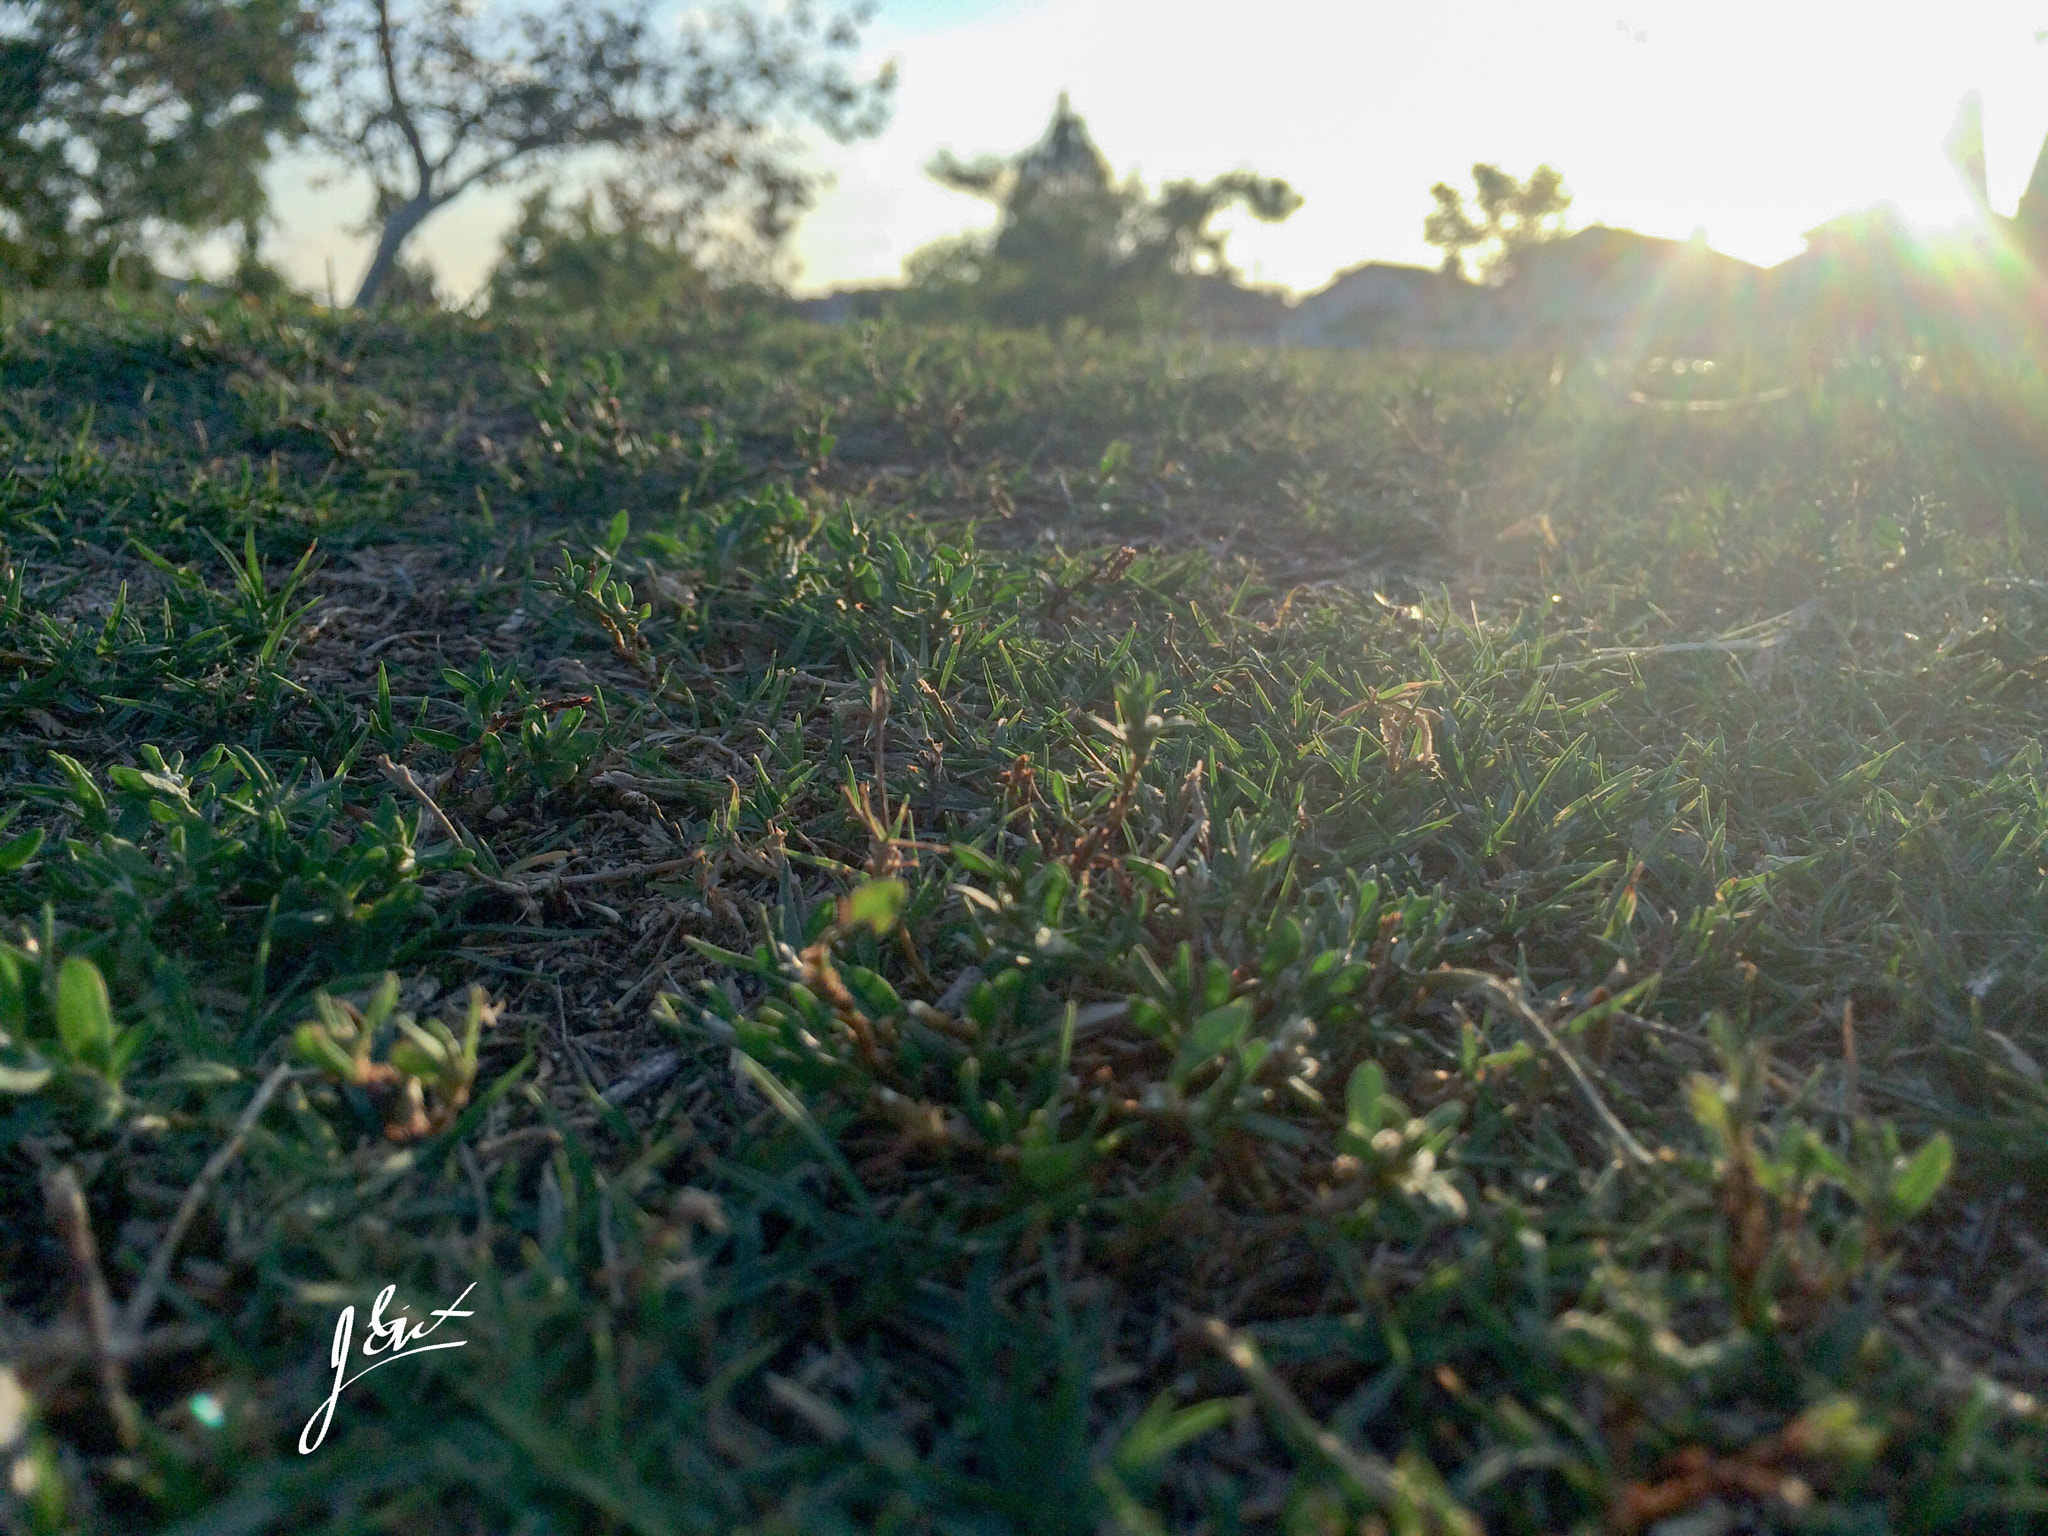 Apple iPhone6,1 + iPhone 5s back camera 4.15mm f/2.2 sample photo. Field of green photography